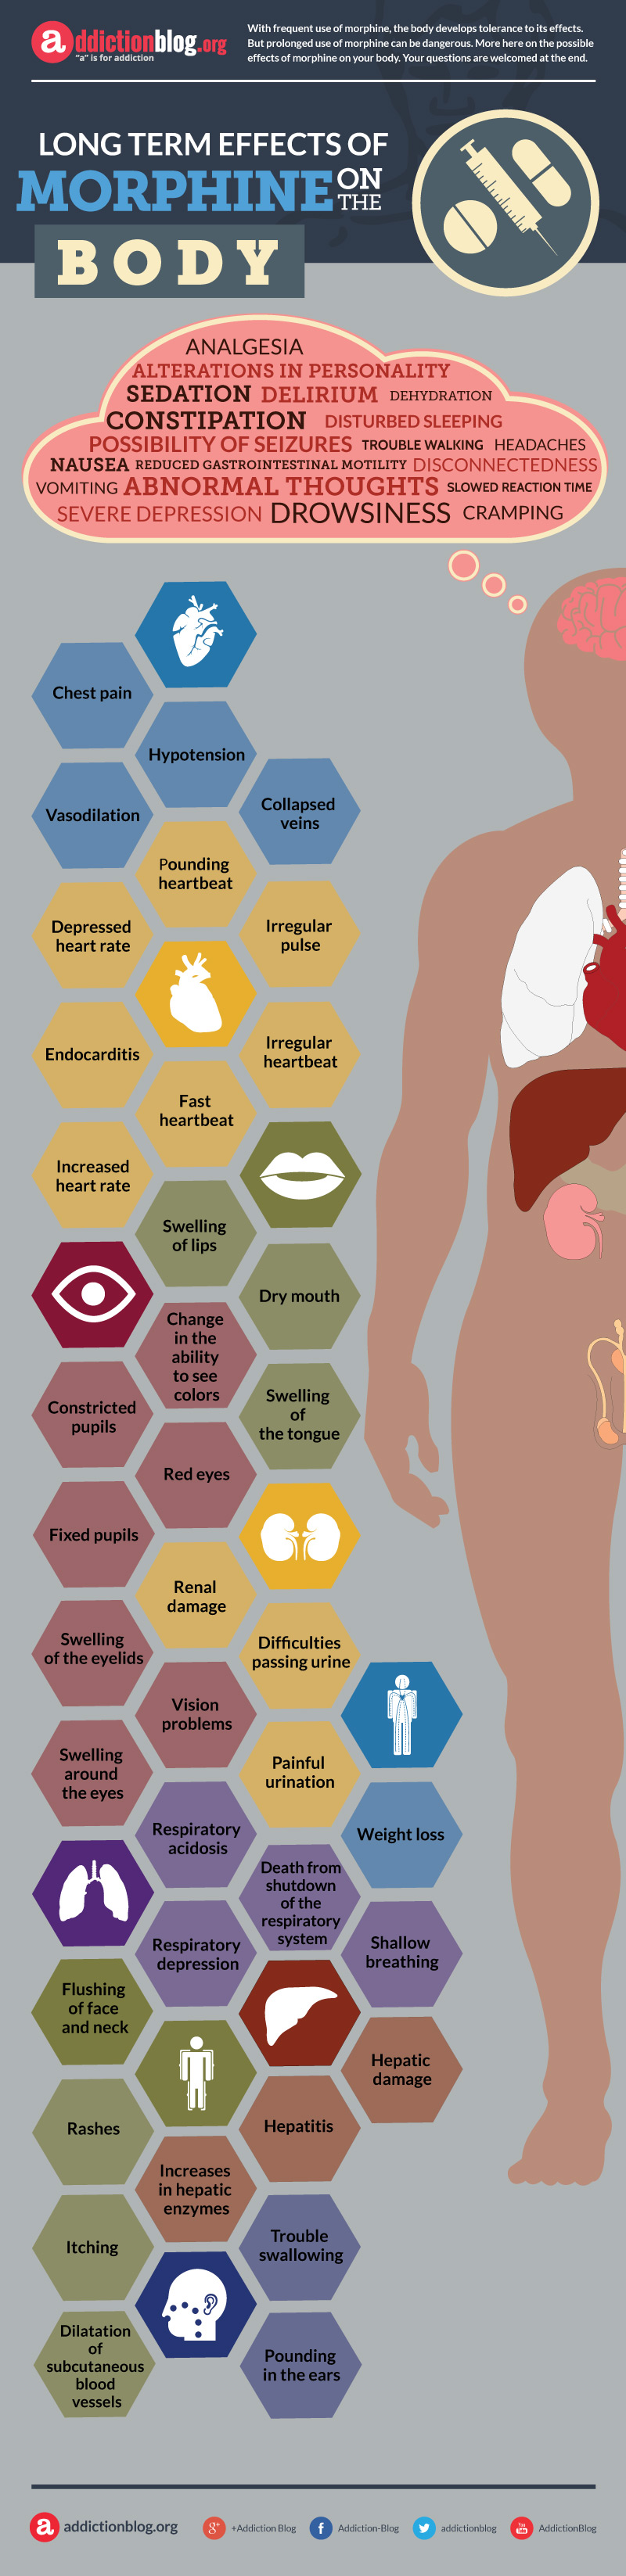 Long term effects of morphine on the body (INFOGRAPHIC)